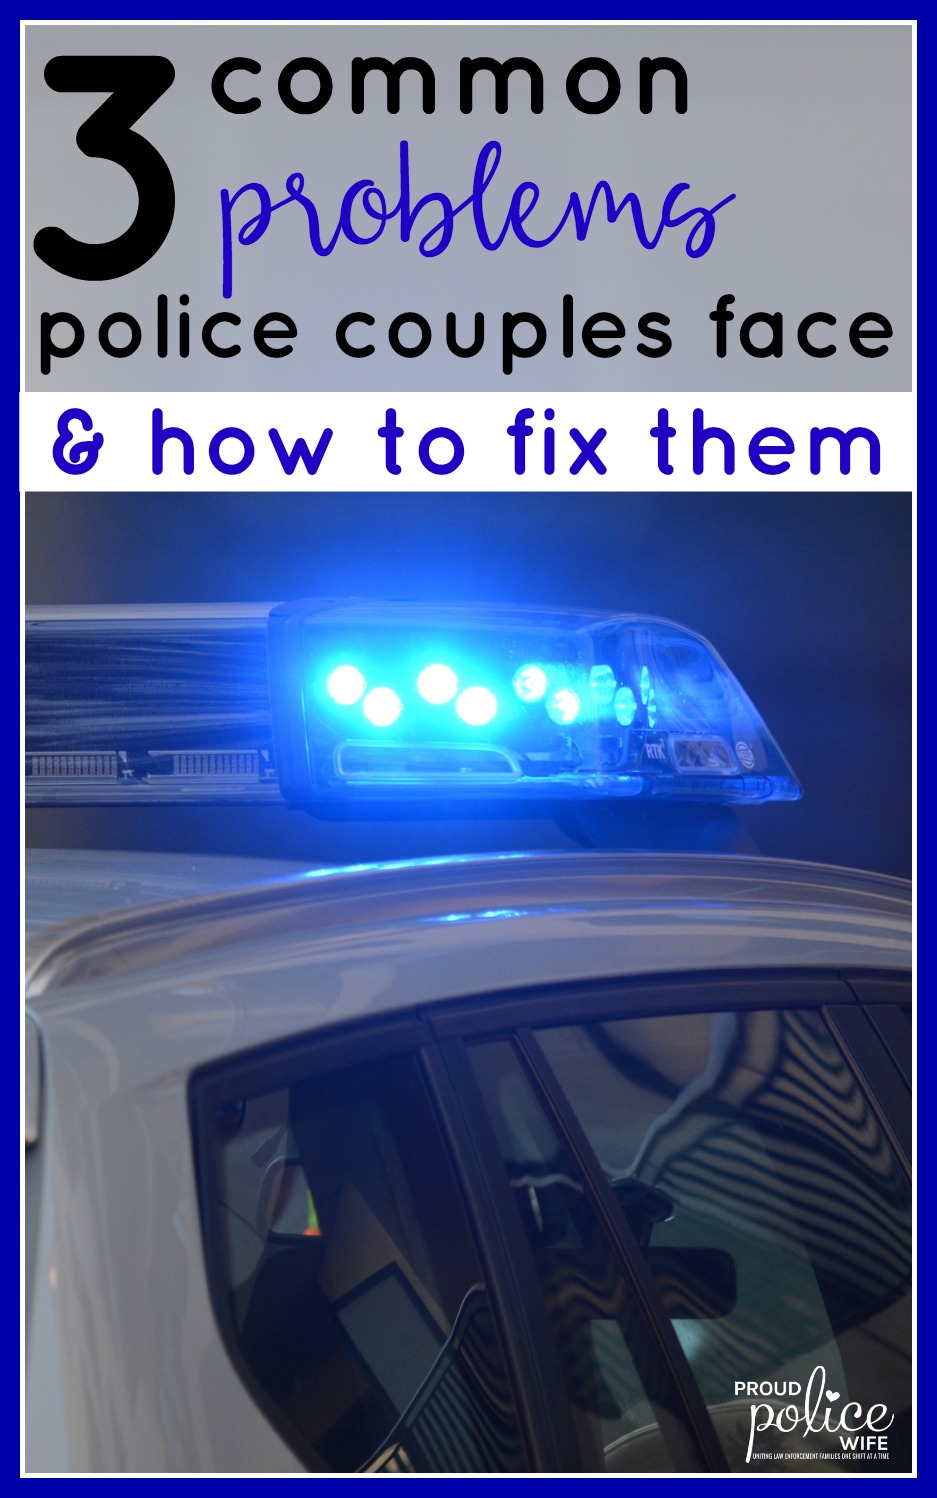 3 Common Problems Police Couples Face & How to Fix Them